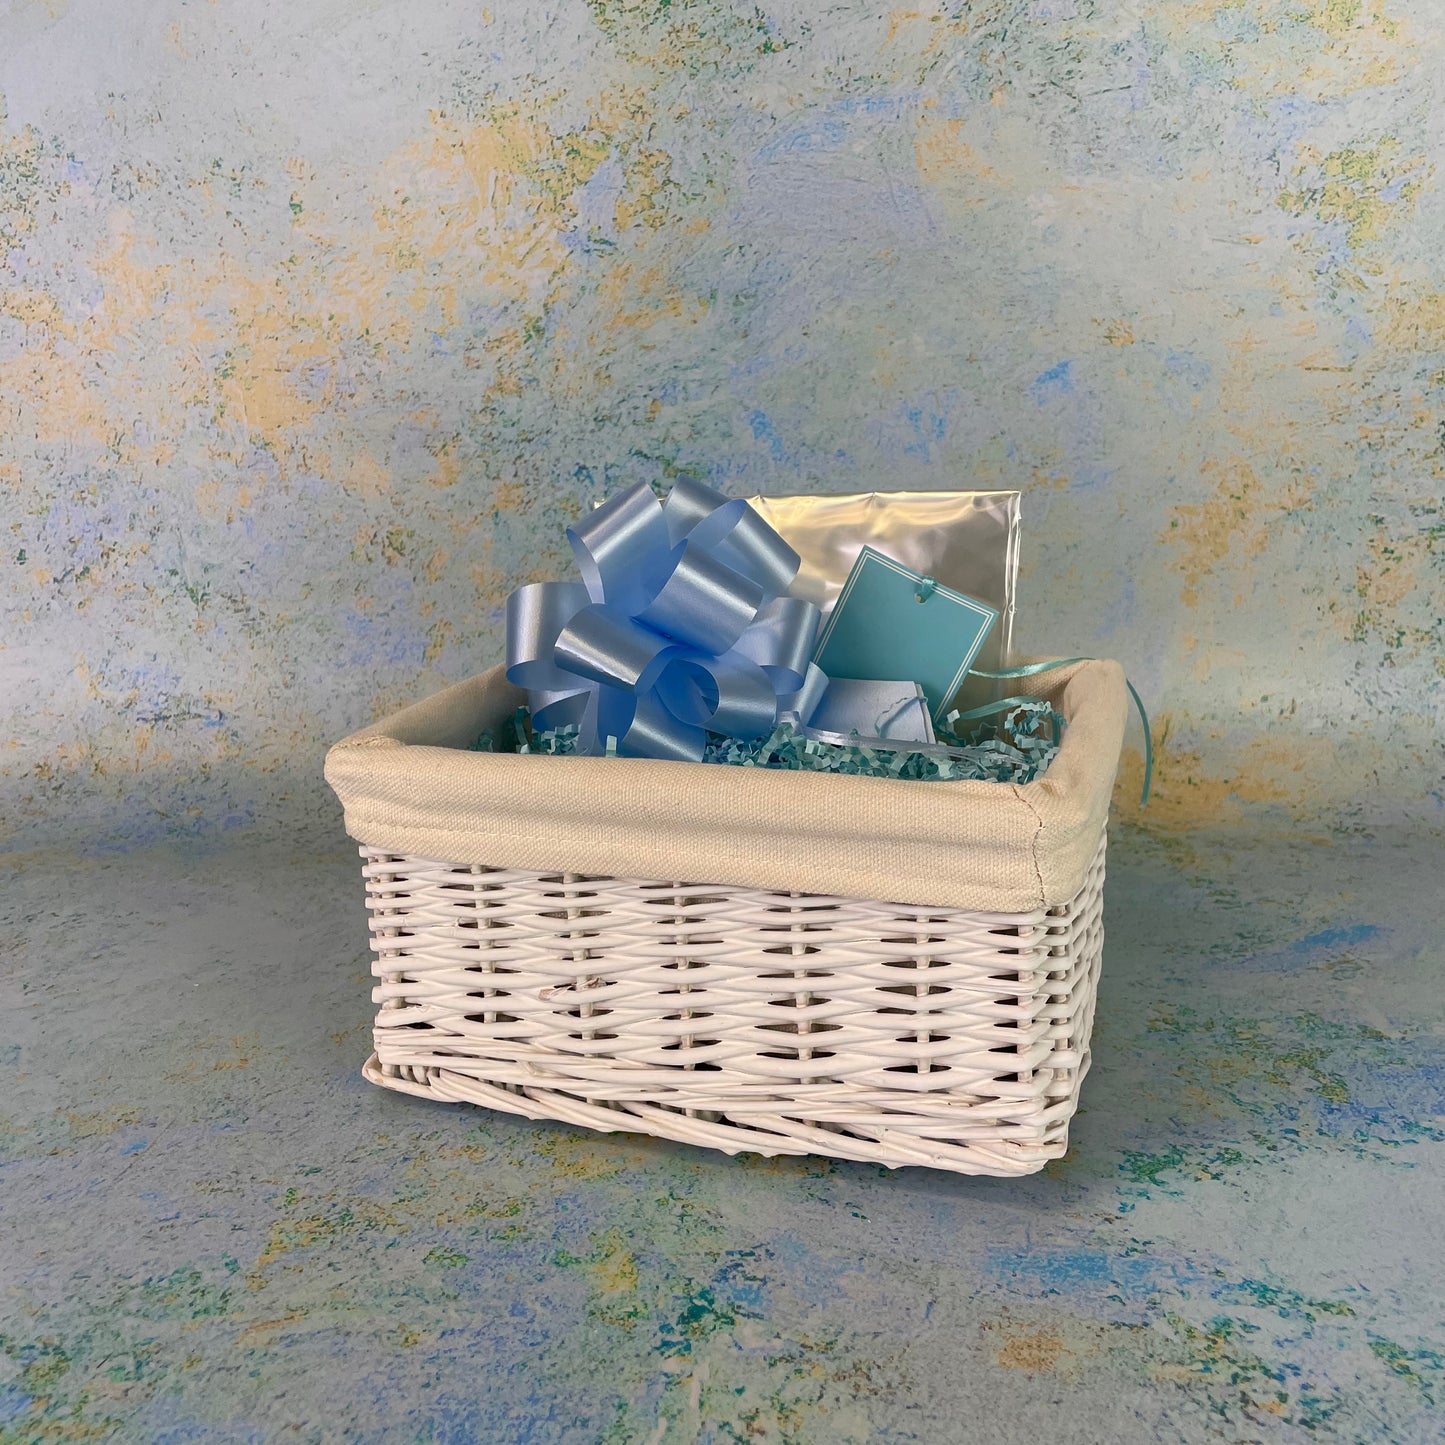 New Baby Gift Basket Kit in Blue and White